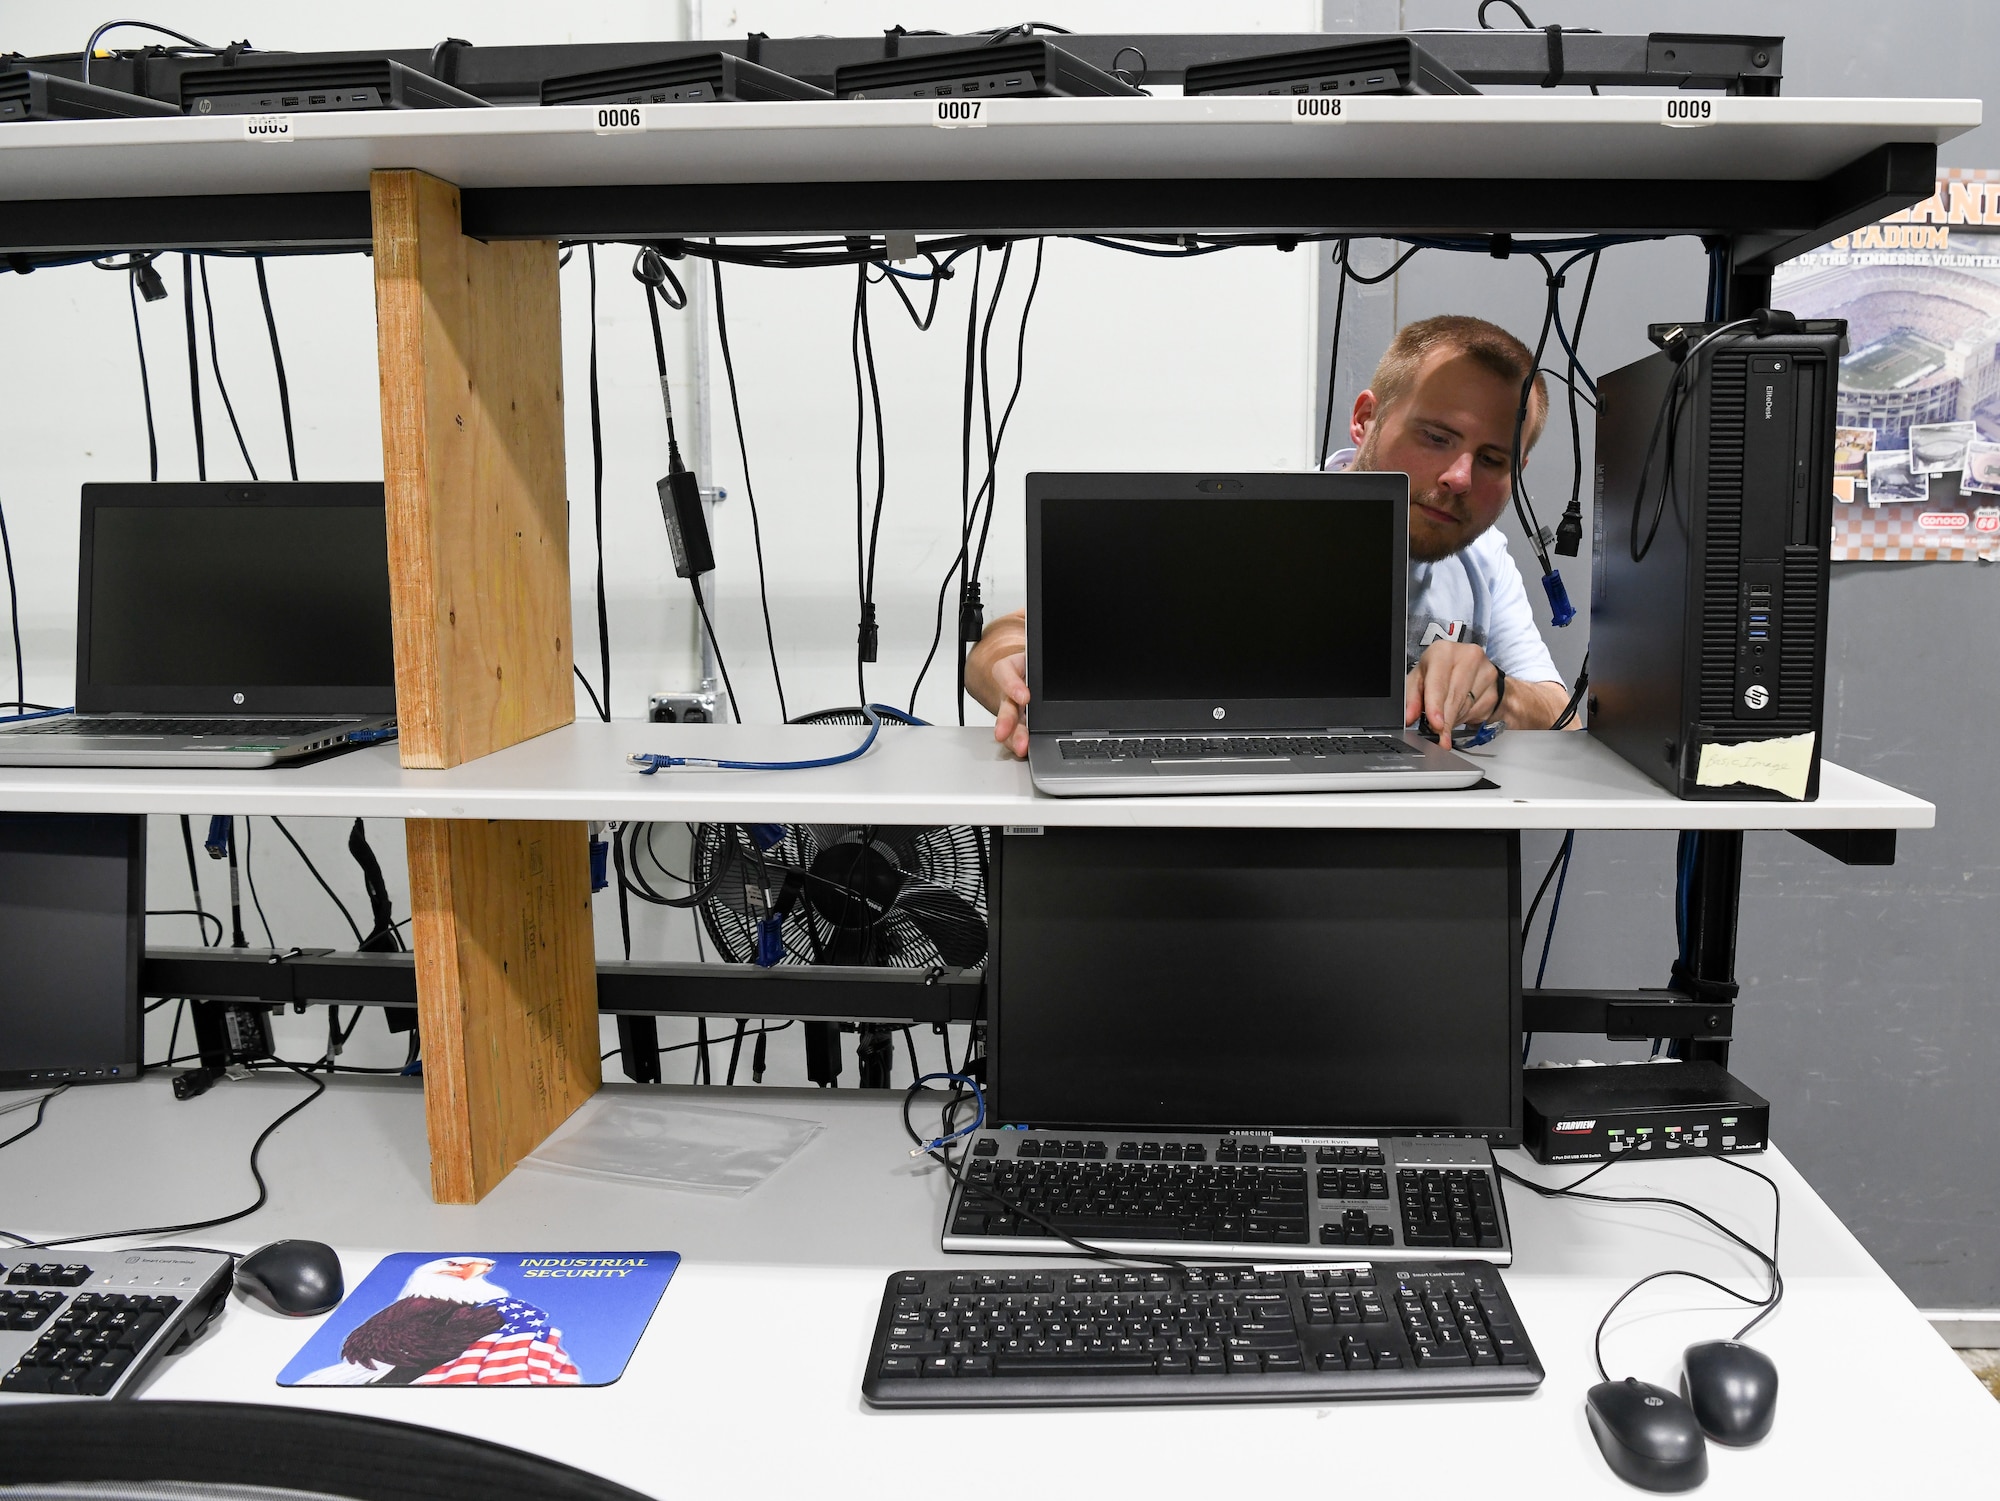 Jonathan Poe, a computer network technician IV, sits and works in the computer staging area.